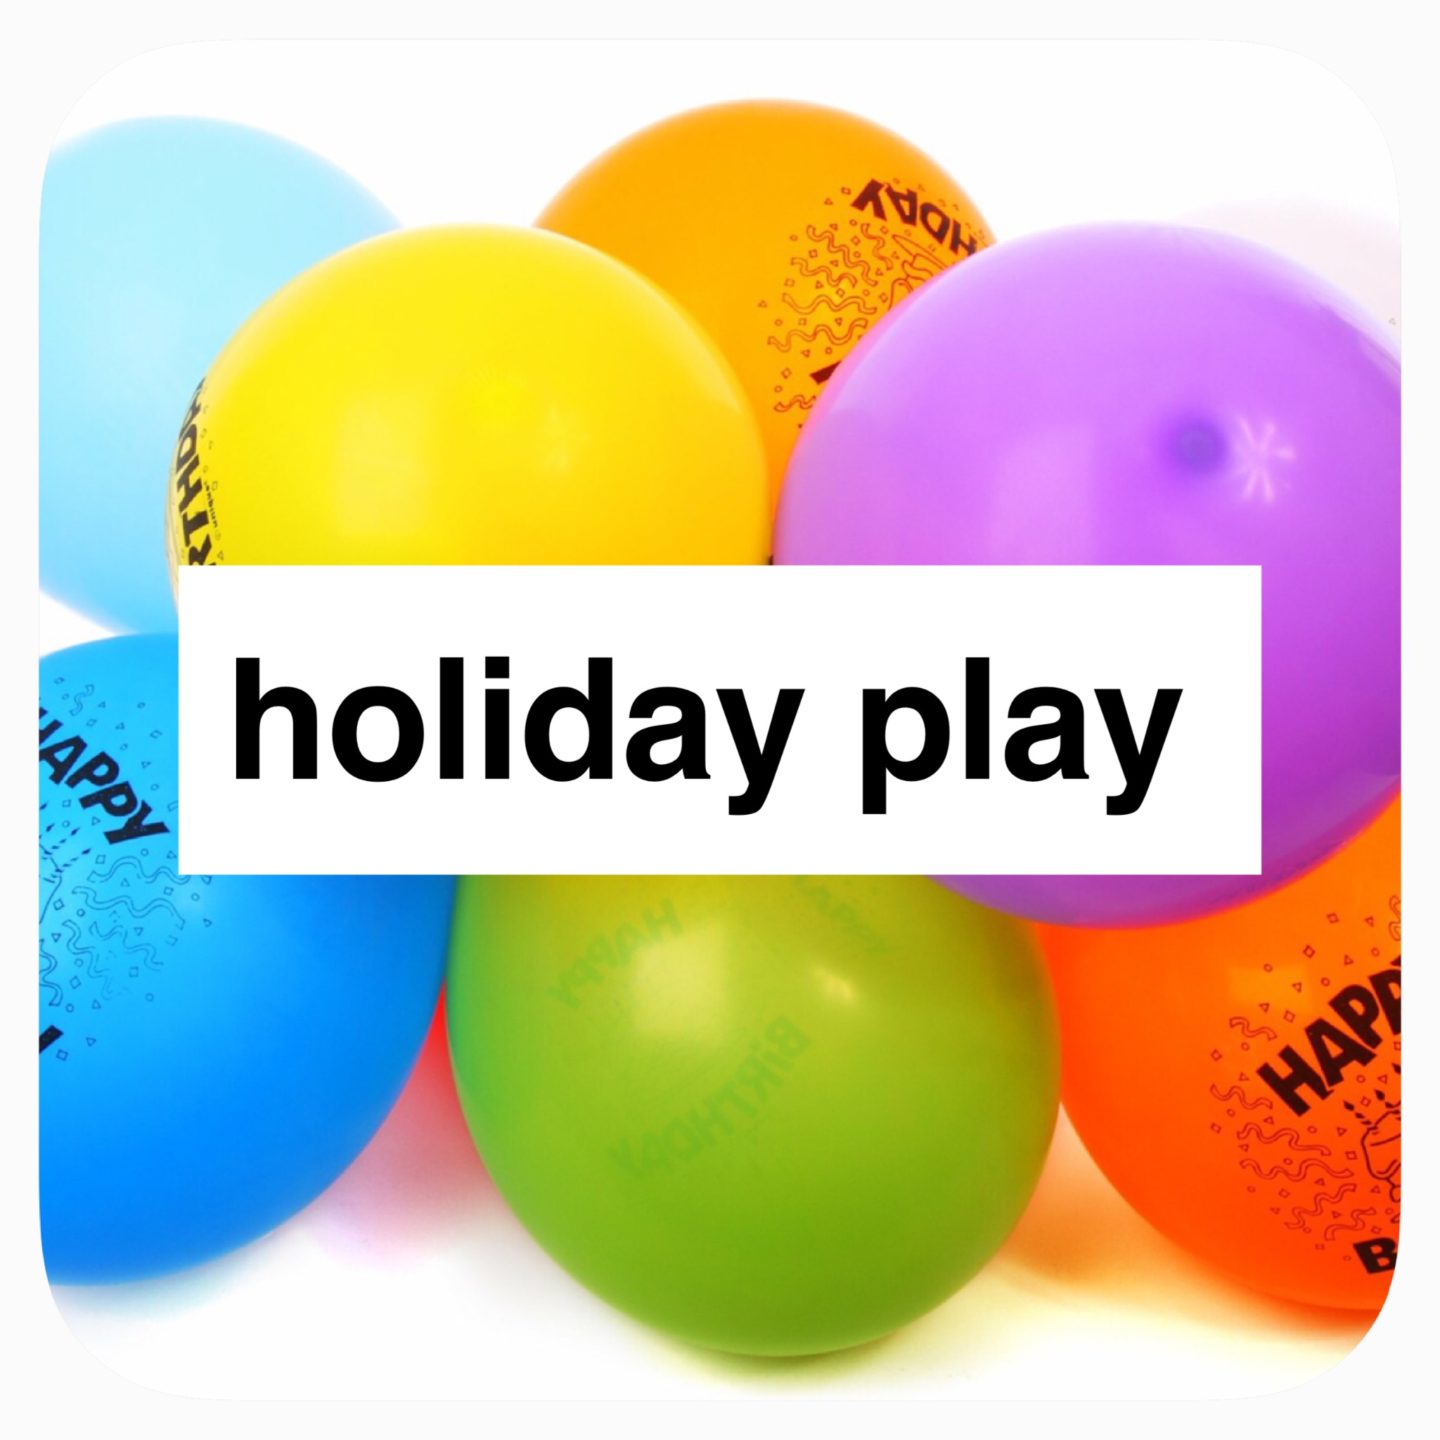 Holiday play ideas from @how2playtoday